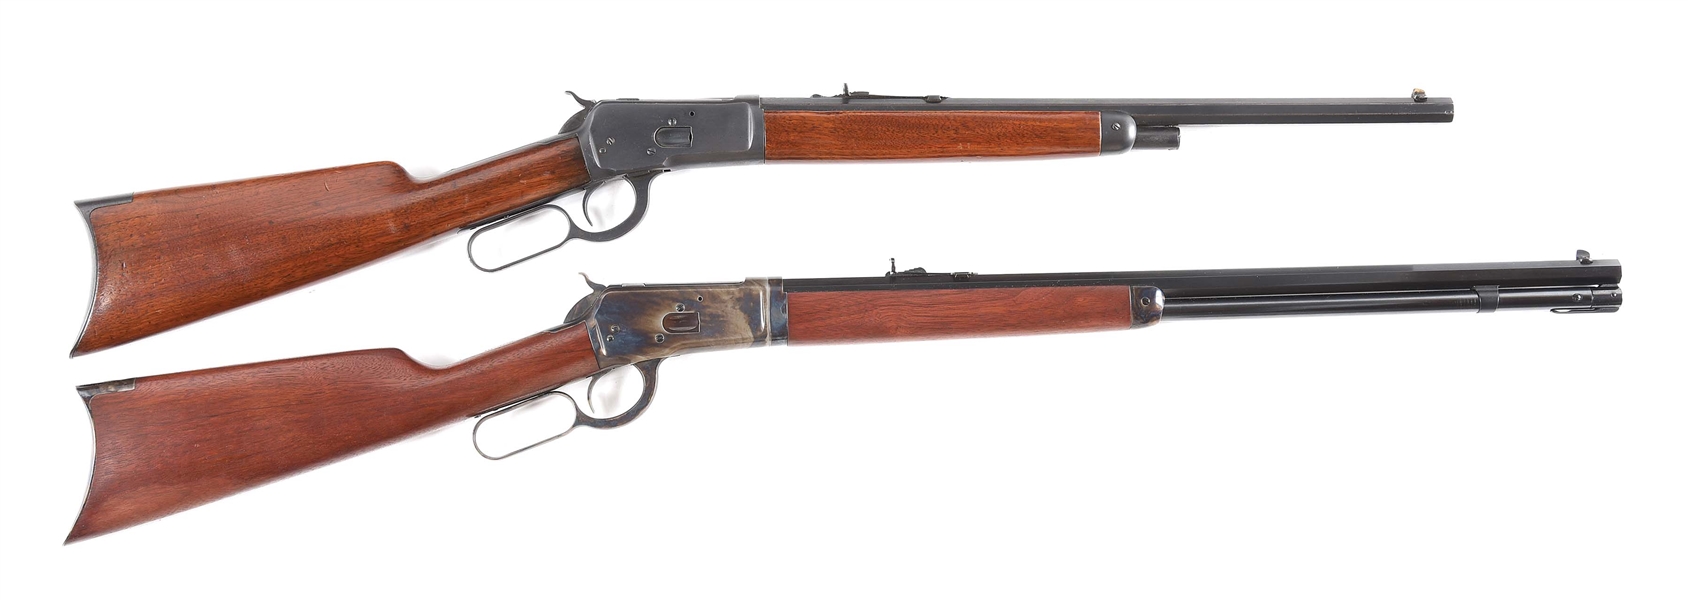 (C) LOT OF 2: WINCHESTER 92 AND CIMARRON 92 LEVER ACTION RIFLES.